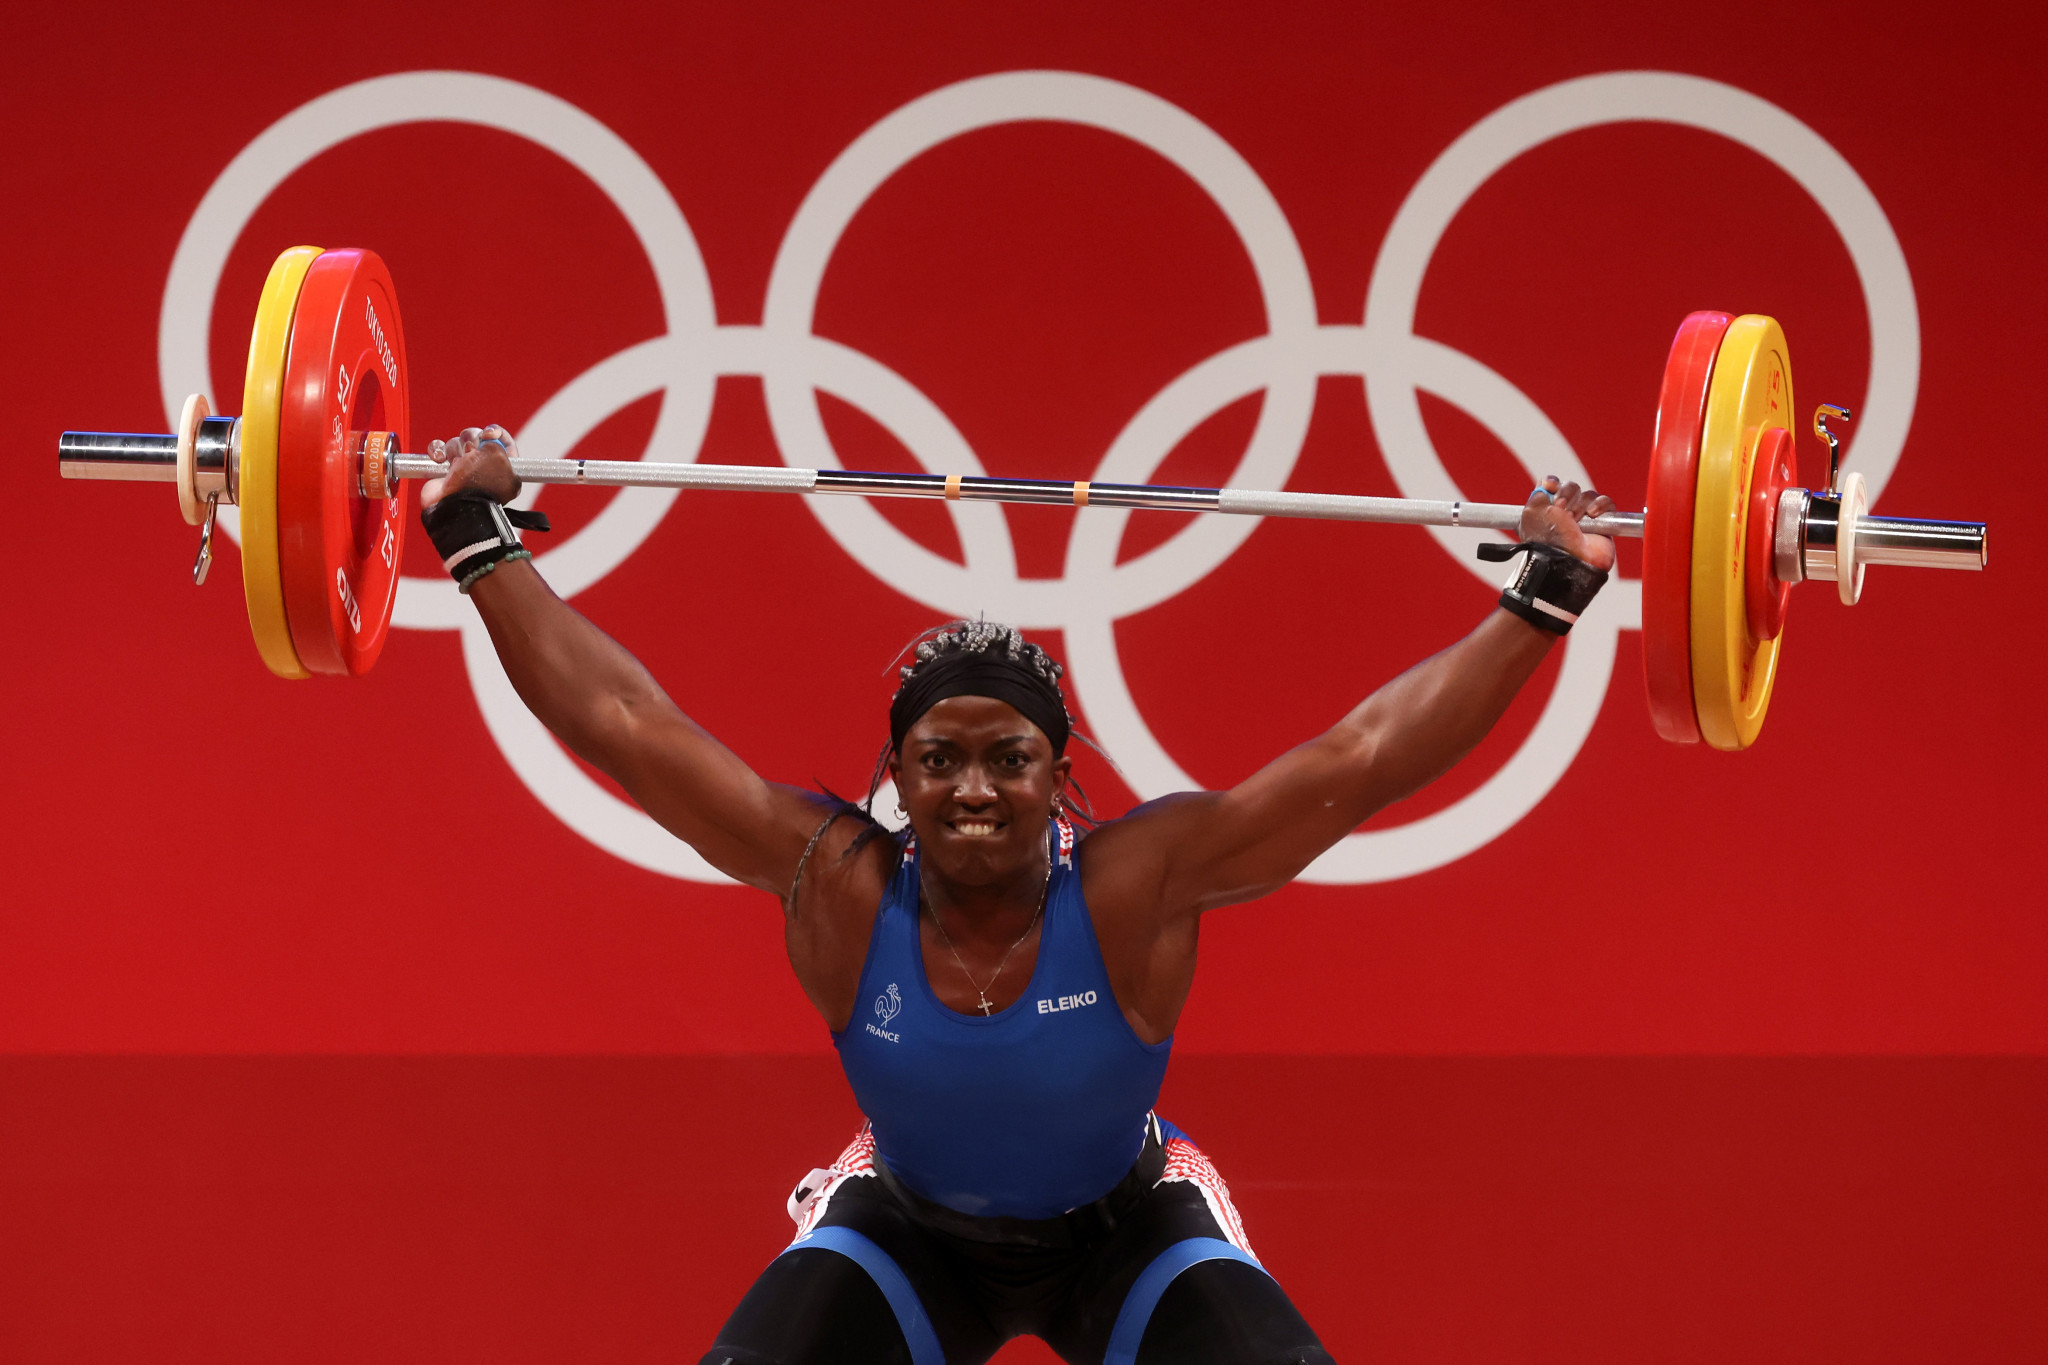 Africa and Oceania lose out in Paris 2024 weightlifting qualifying system